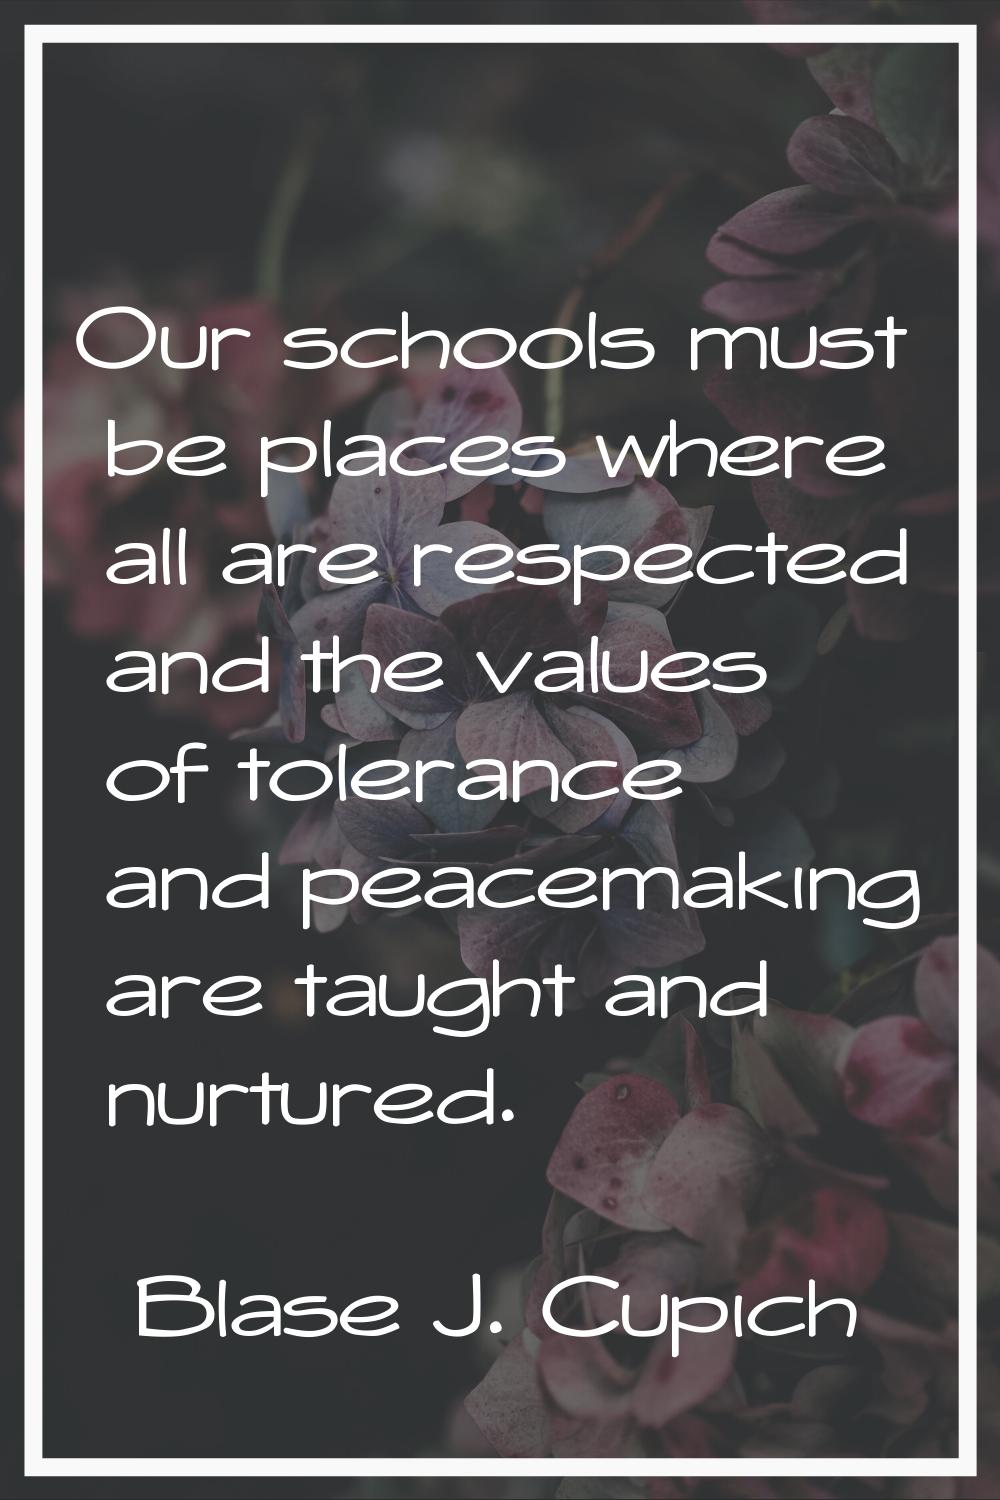 Our schools must be places where all are respected and the values of tolerance and peacemaking are 